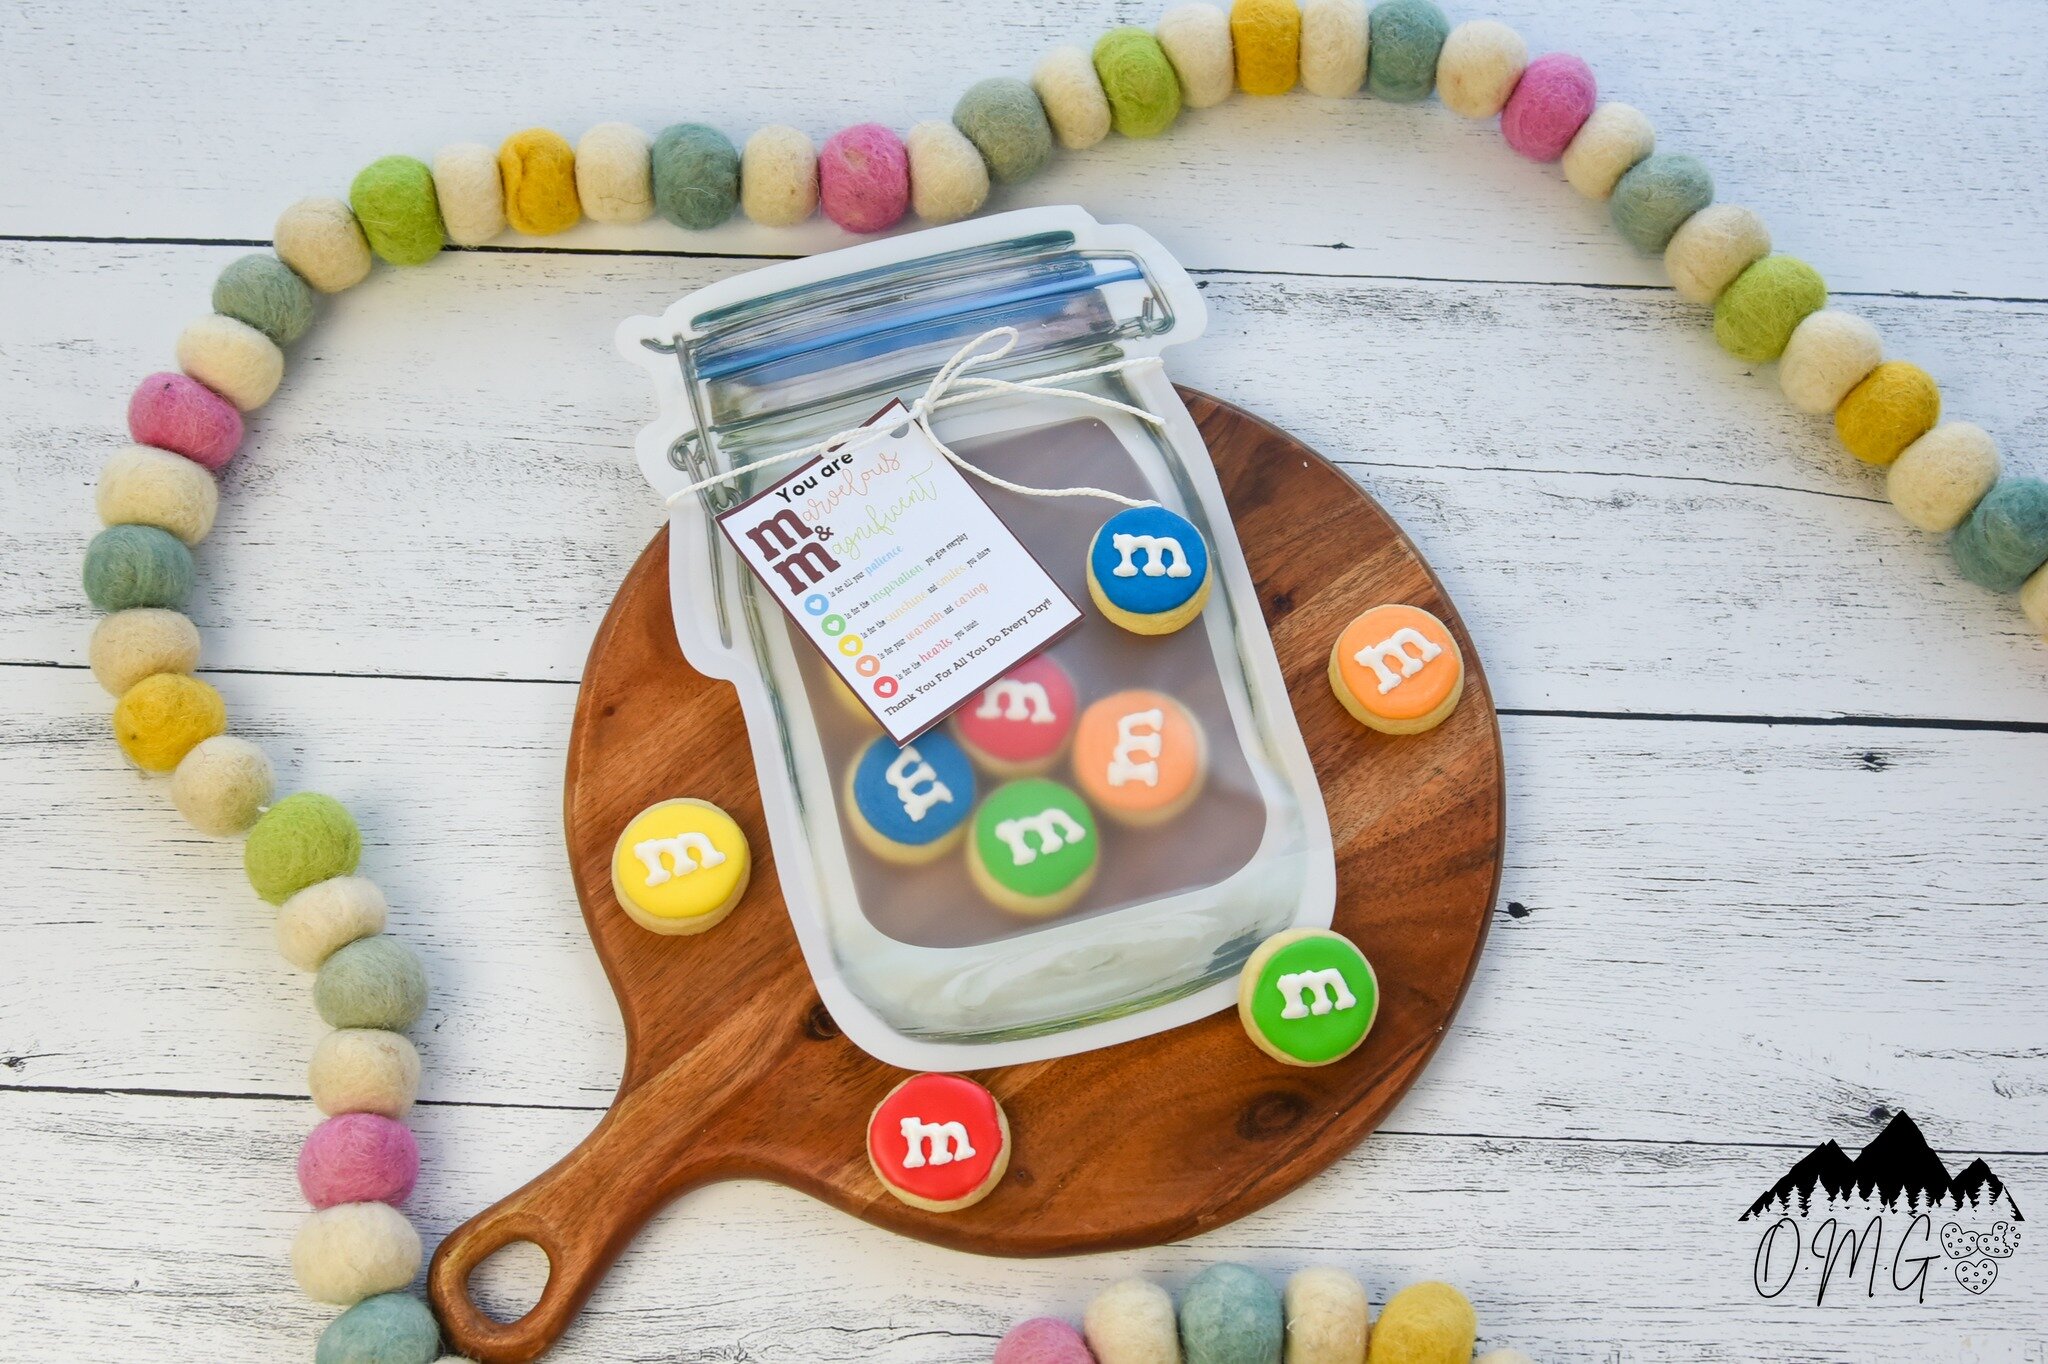 🌈🍪 BACK TO SCHOOL SPECIAL: MINI M&amp;M COLORED SUGAR COOKIES 🍪🌈

Calling all teachers and cookie lovers! 🎉 The perfect treat to make this back to school season sweeter has arrived - our delectable bag of Mini M&amp;M Colored Sugar Cookies! 🌈✨
